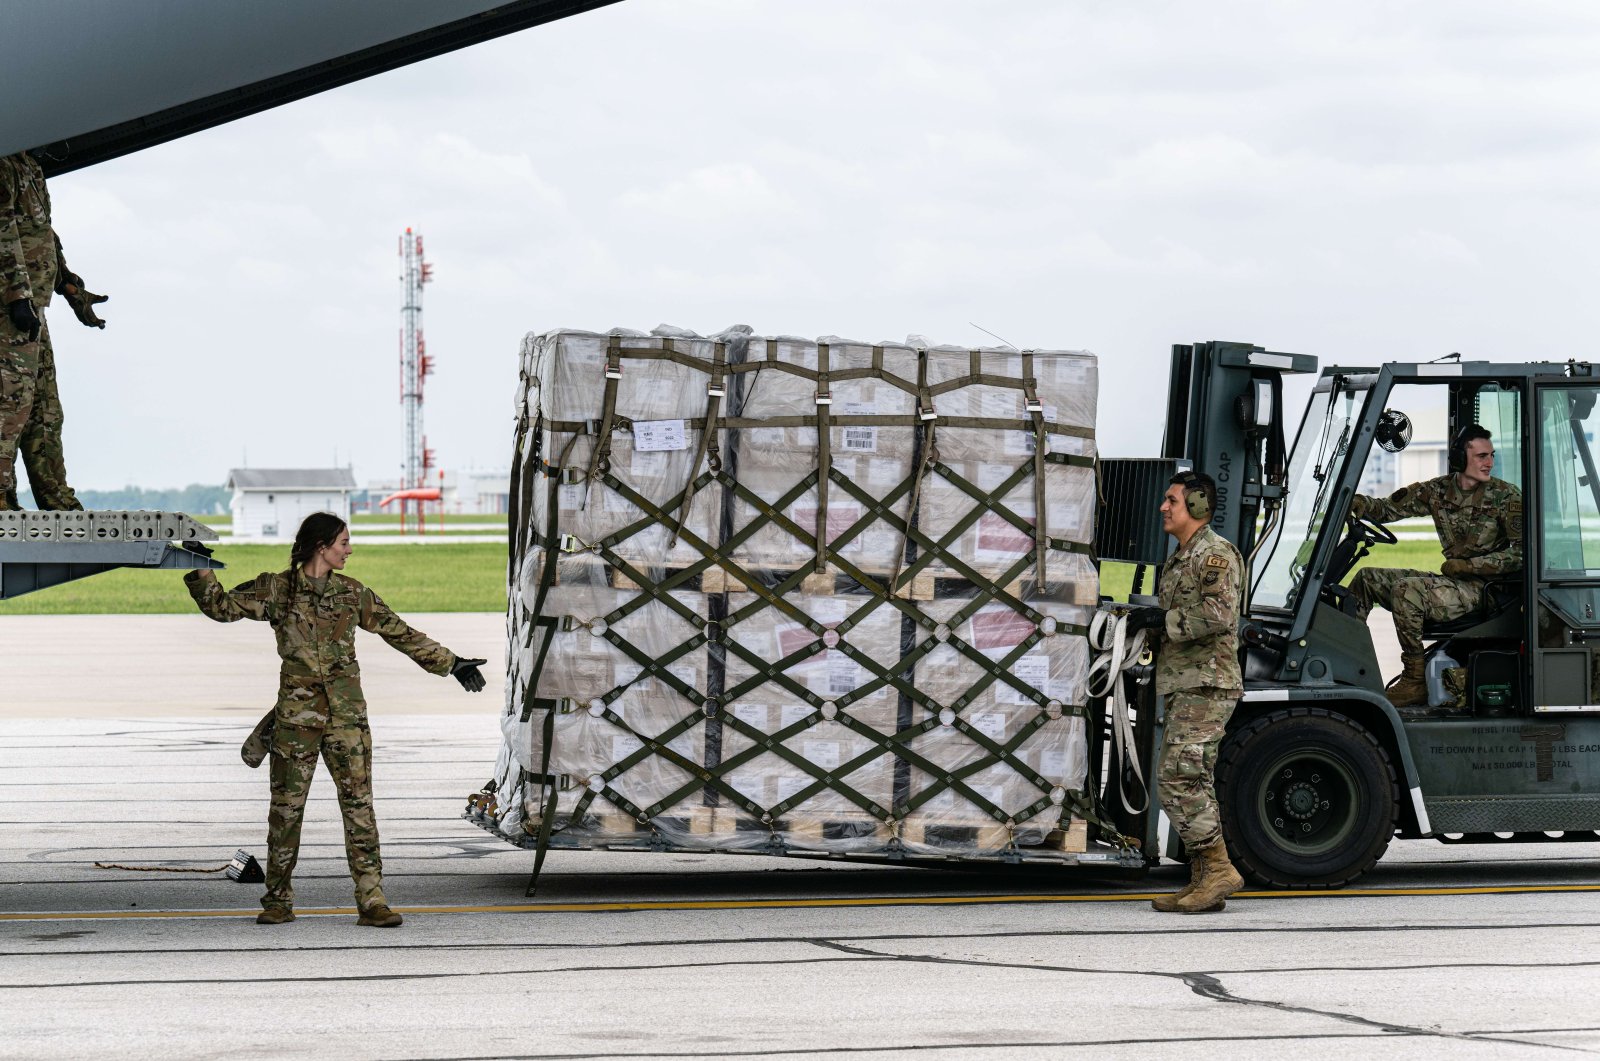 Airmen unload pallets from the cargo bay of a U.S. Air Force C-17 carrying 78,000 lbs of Nestlé Health Science Alfamino Infant and Alfamino Junior formula from Europe at Indianapolis Airport on May 22, 2022. (AFP Photo)